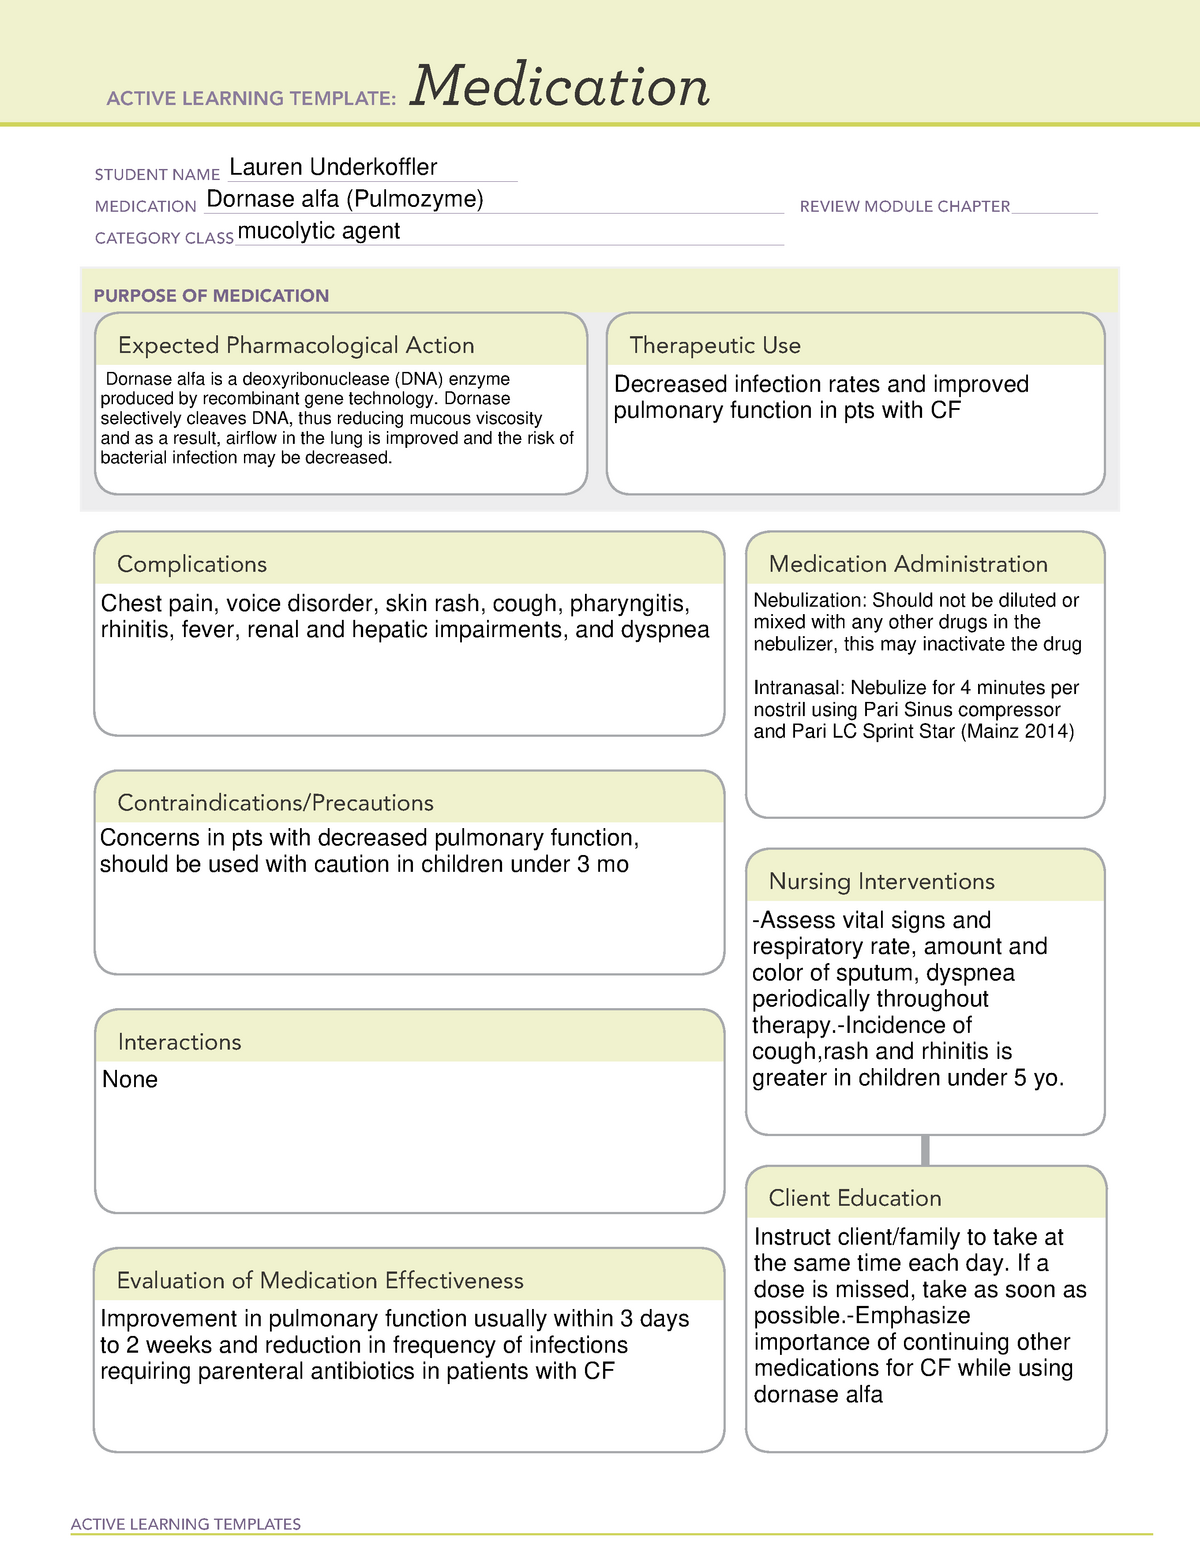 salicylates-medication-templates-pain-and-inflammation-active-learning-templates